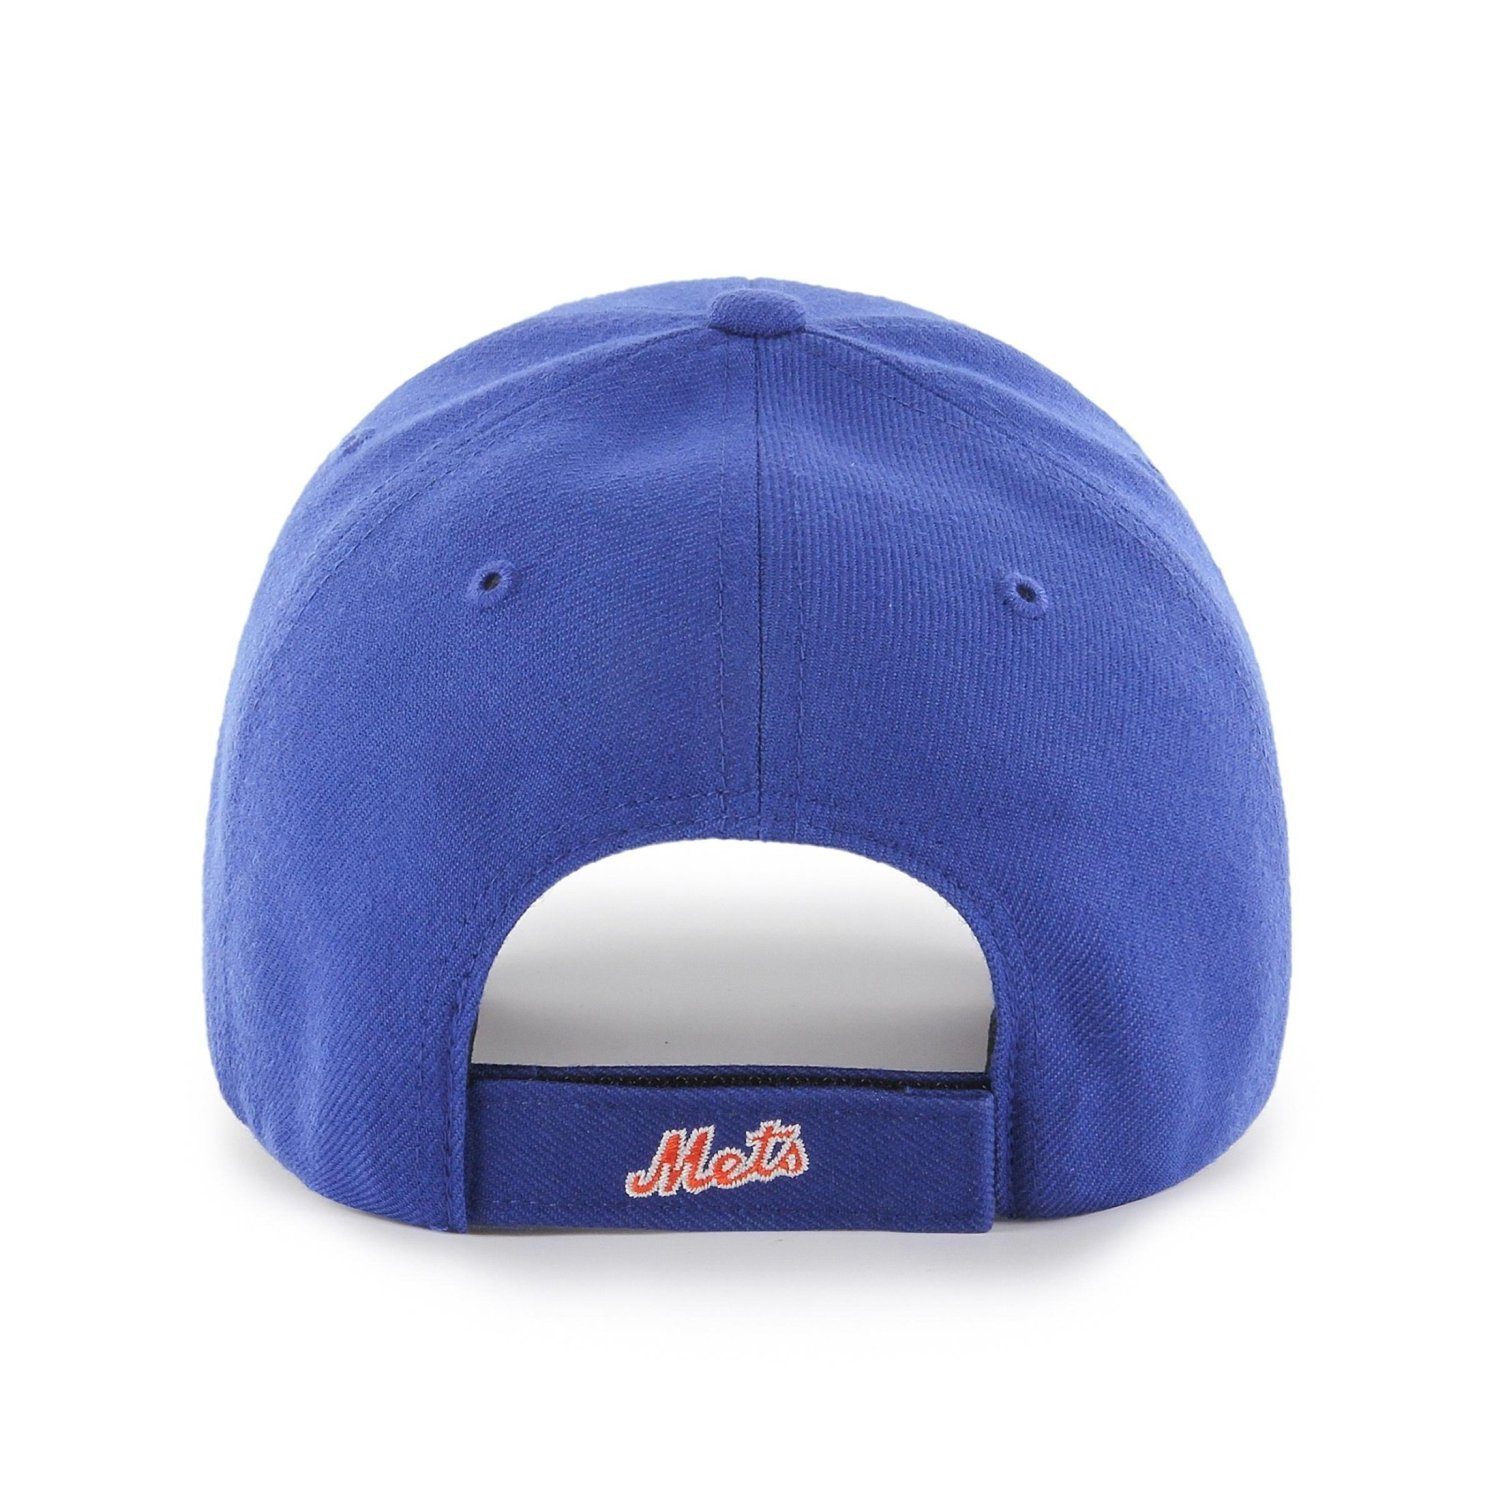 x27;47 Brand Trucker MLB Relaxed New Cap Fit York Mets